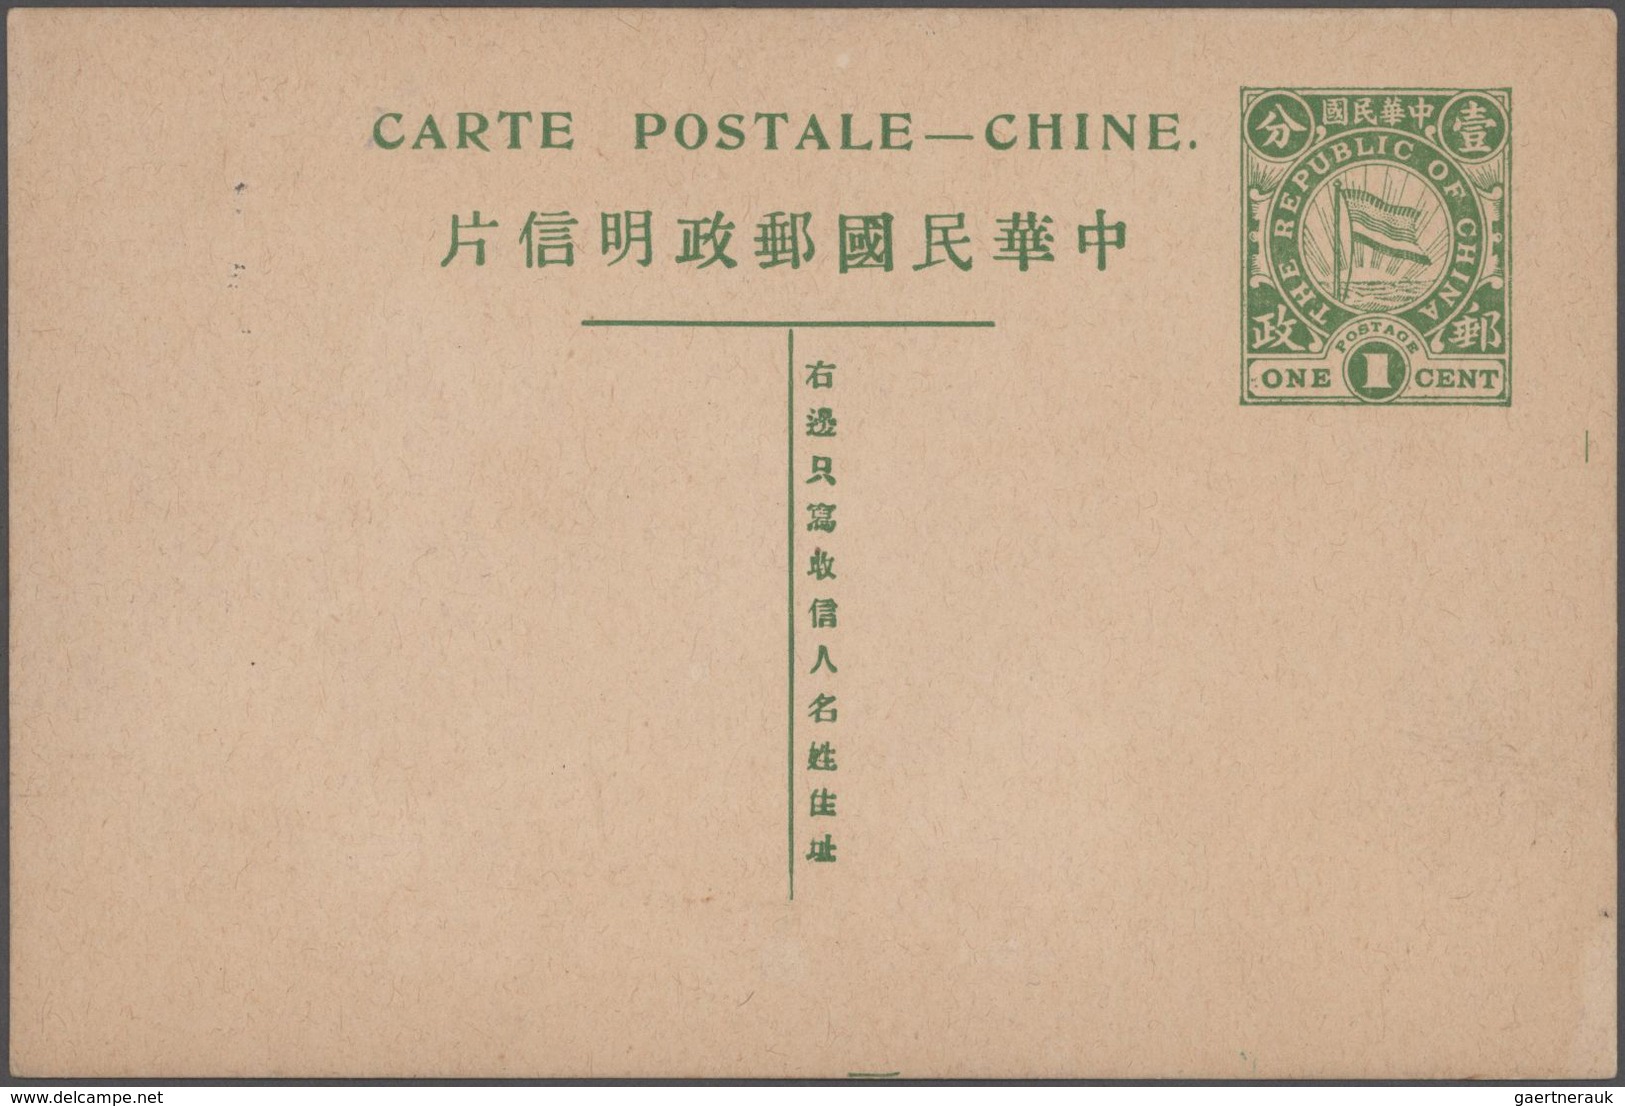 China: 1898/1940, lot covers/stationery mint/used inc. 1894 LOCAL POST AMOY blue pmk., registration